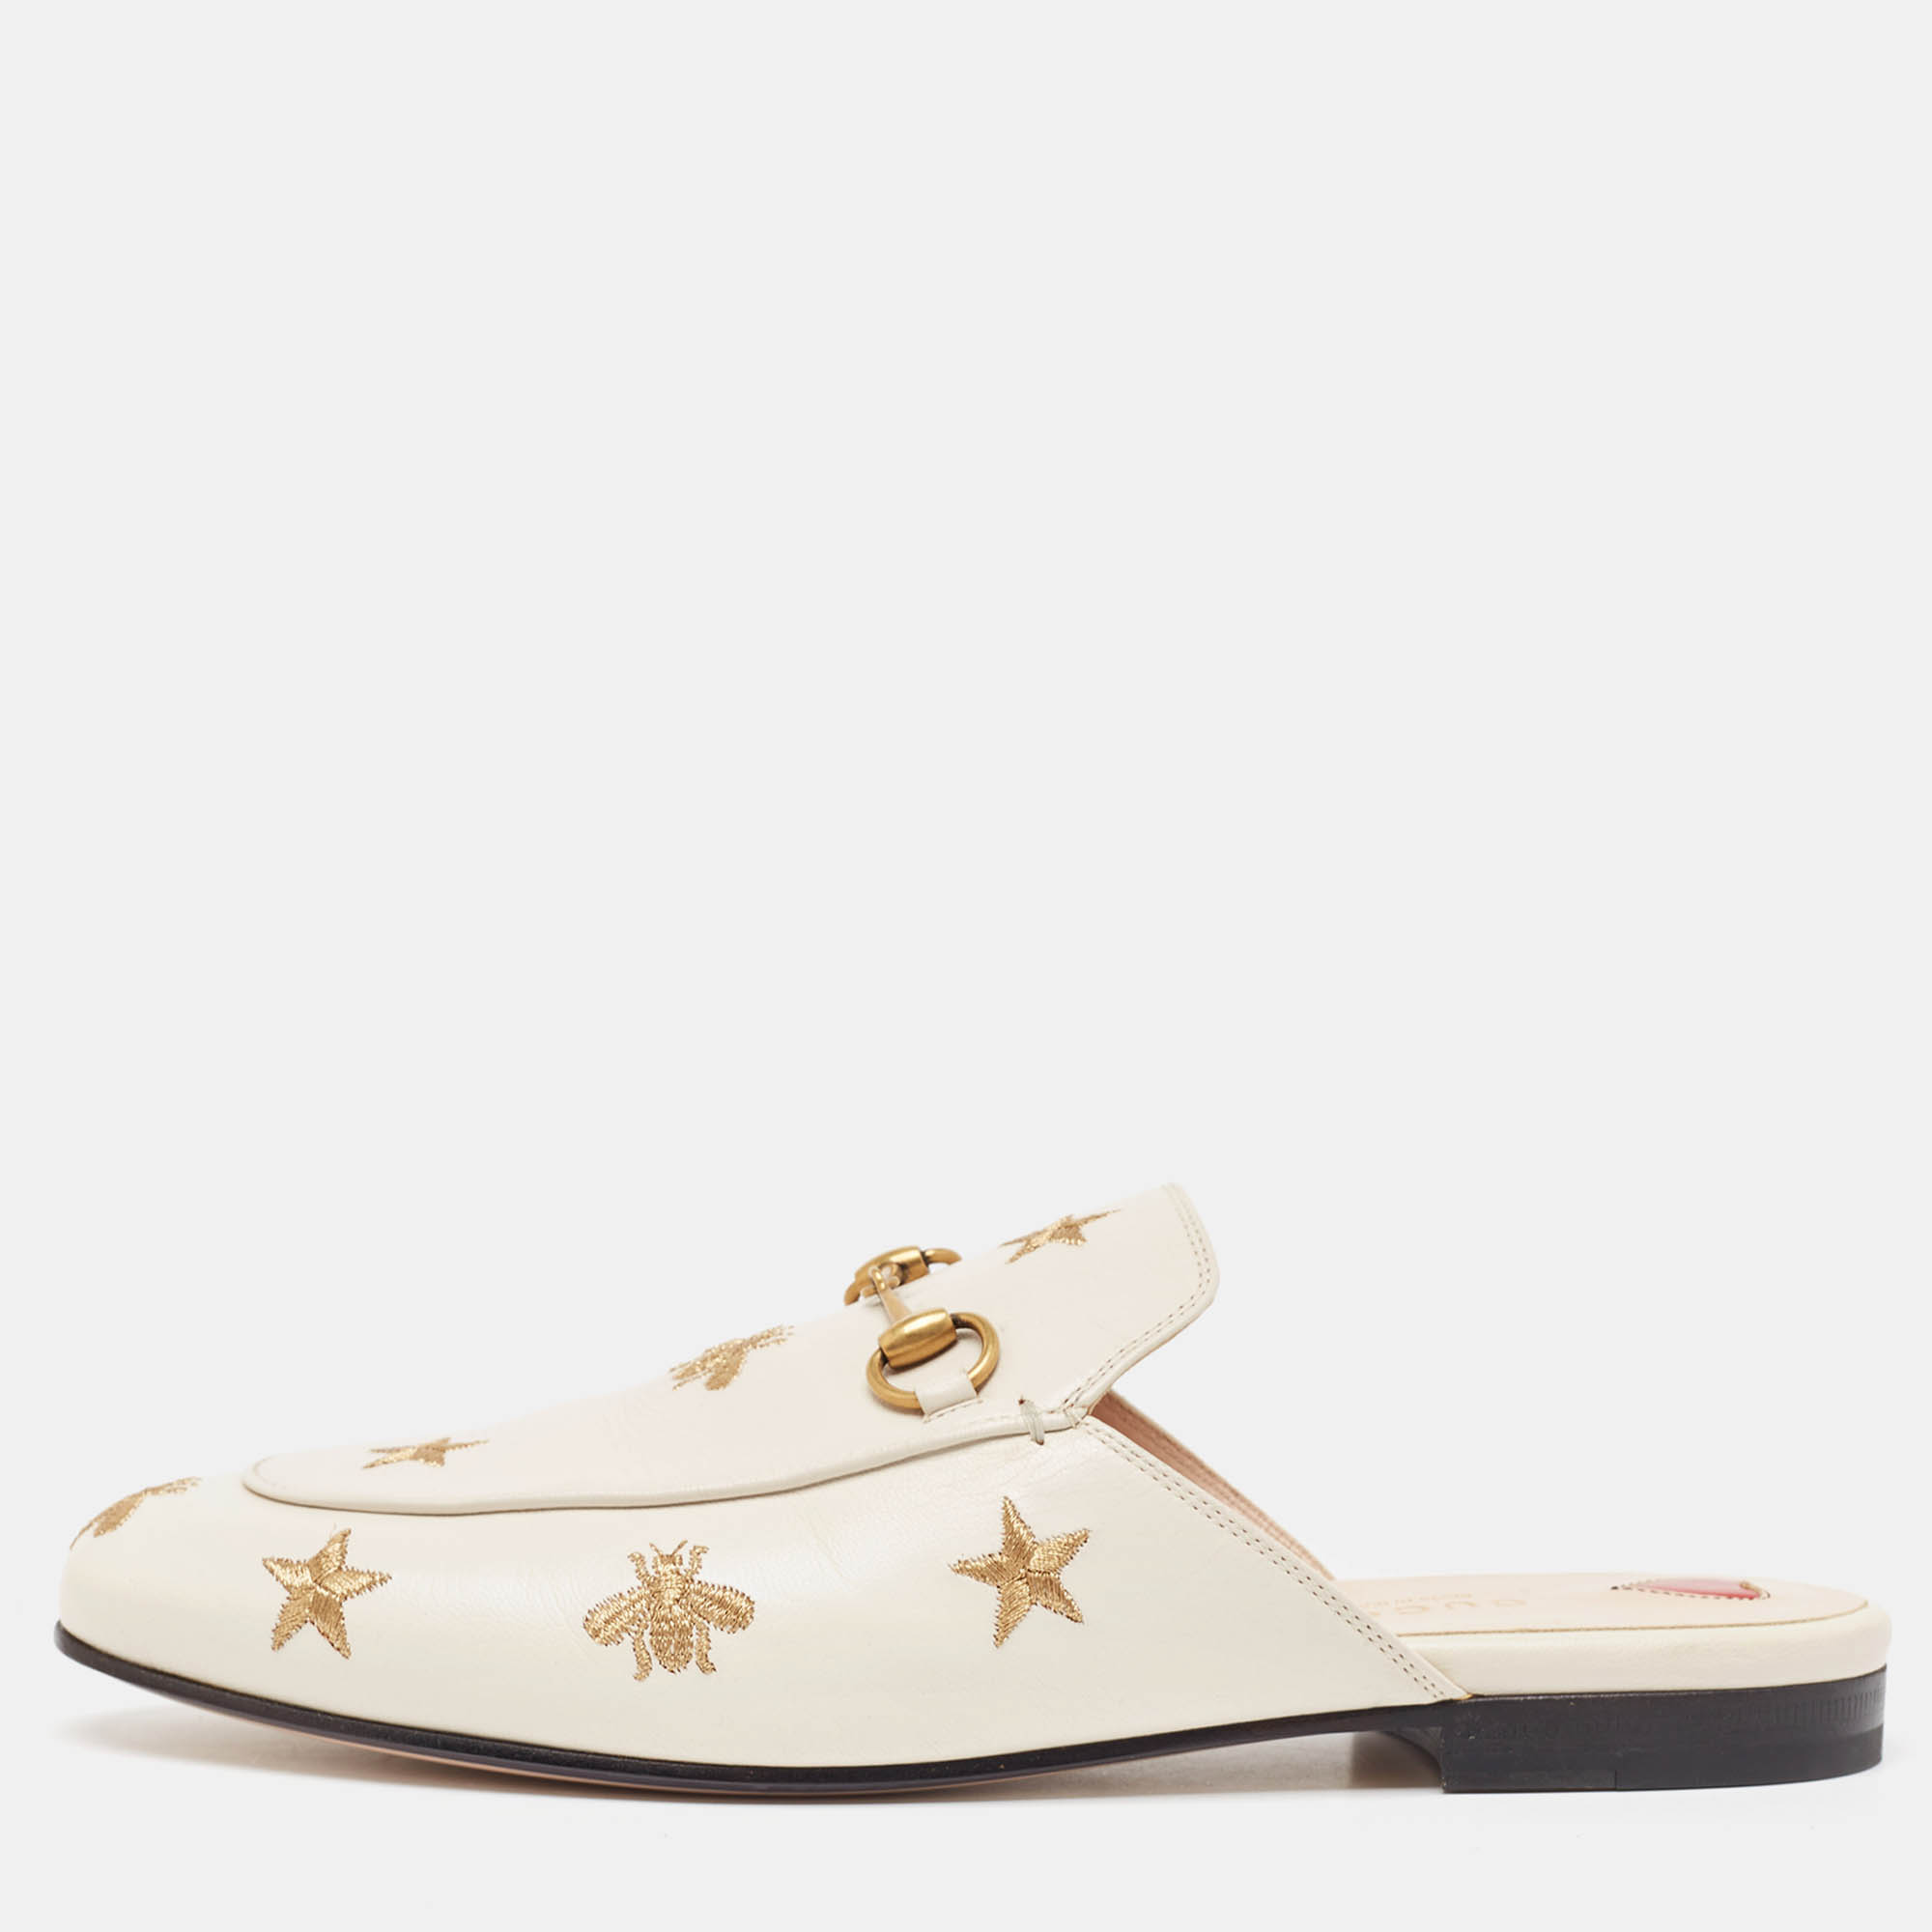 

Gucci Off White Leather Bee and Star Embroidered Princetown Flat Mules Size